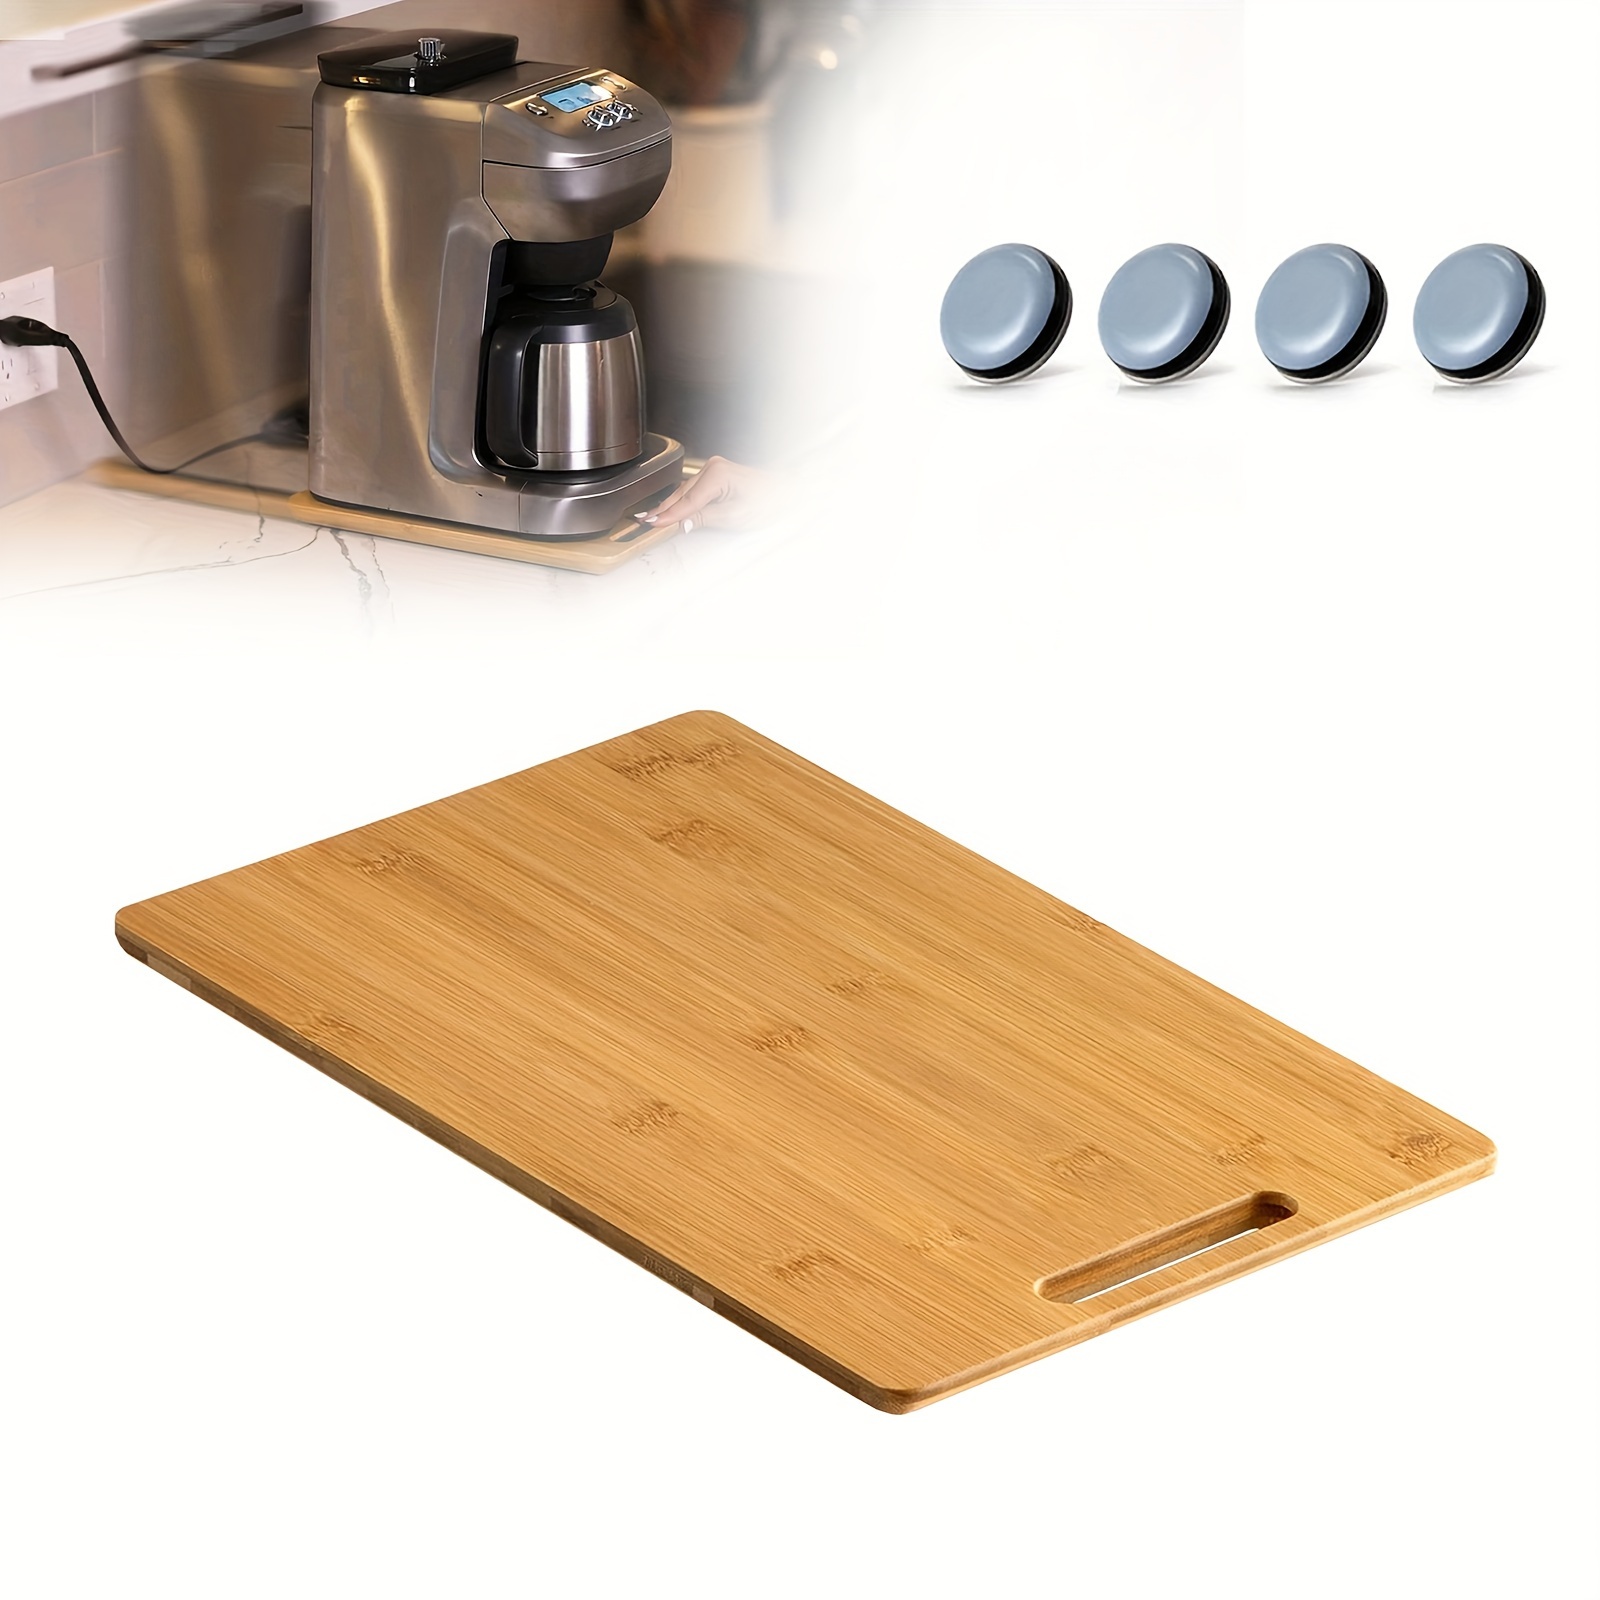 Kitchen Sliding Tray For Coffee Maker And Appliances - Temu